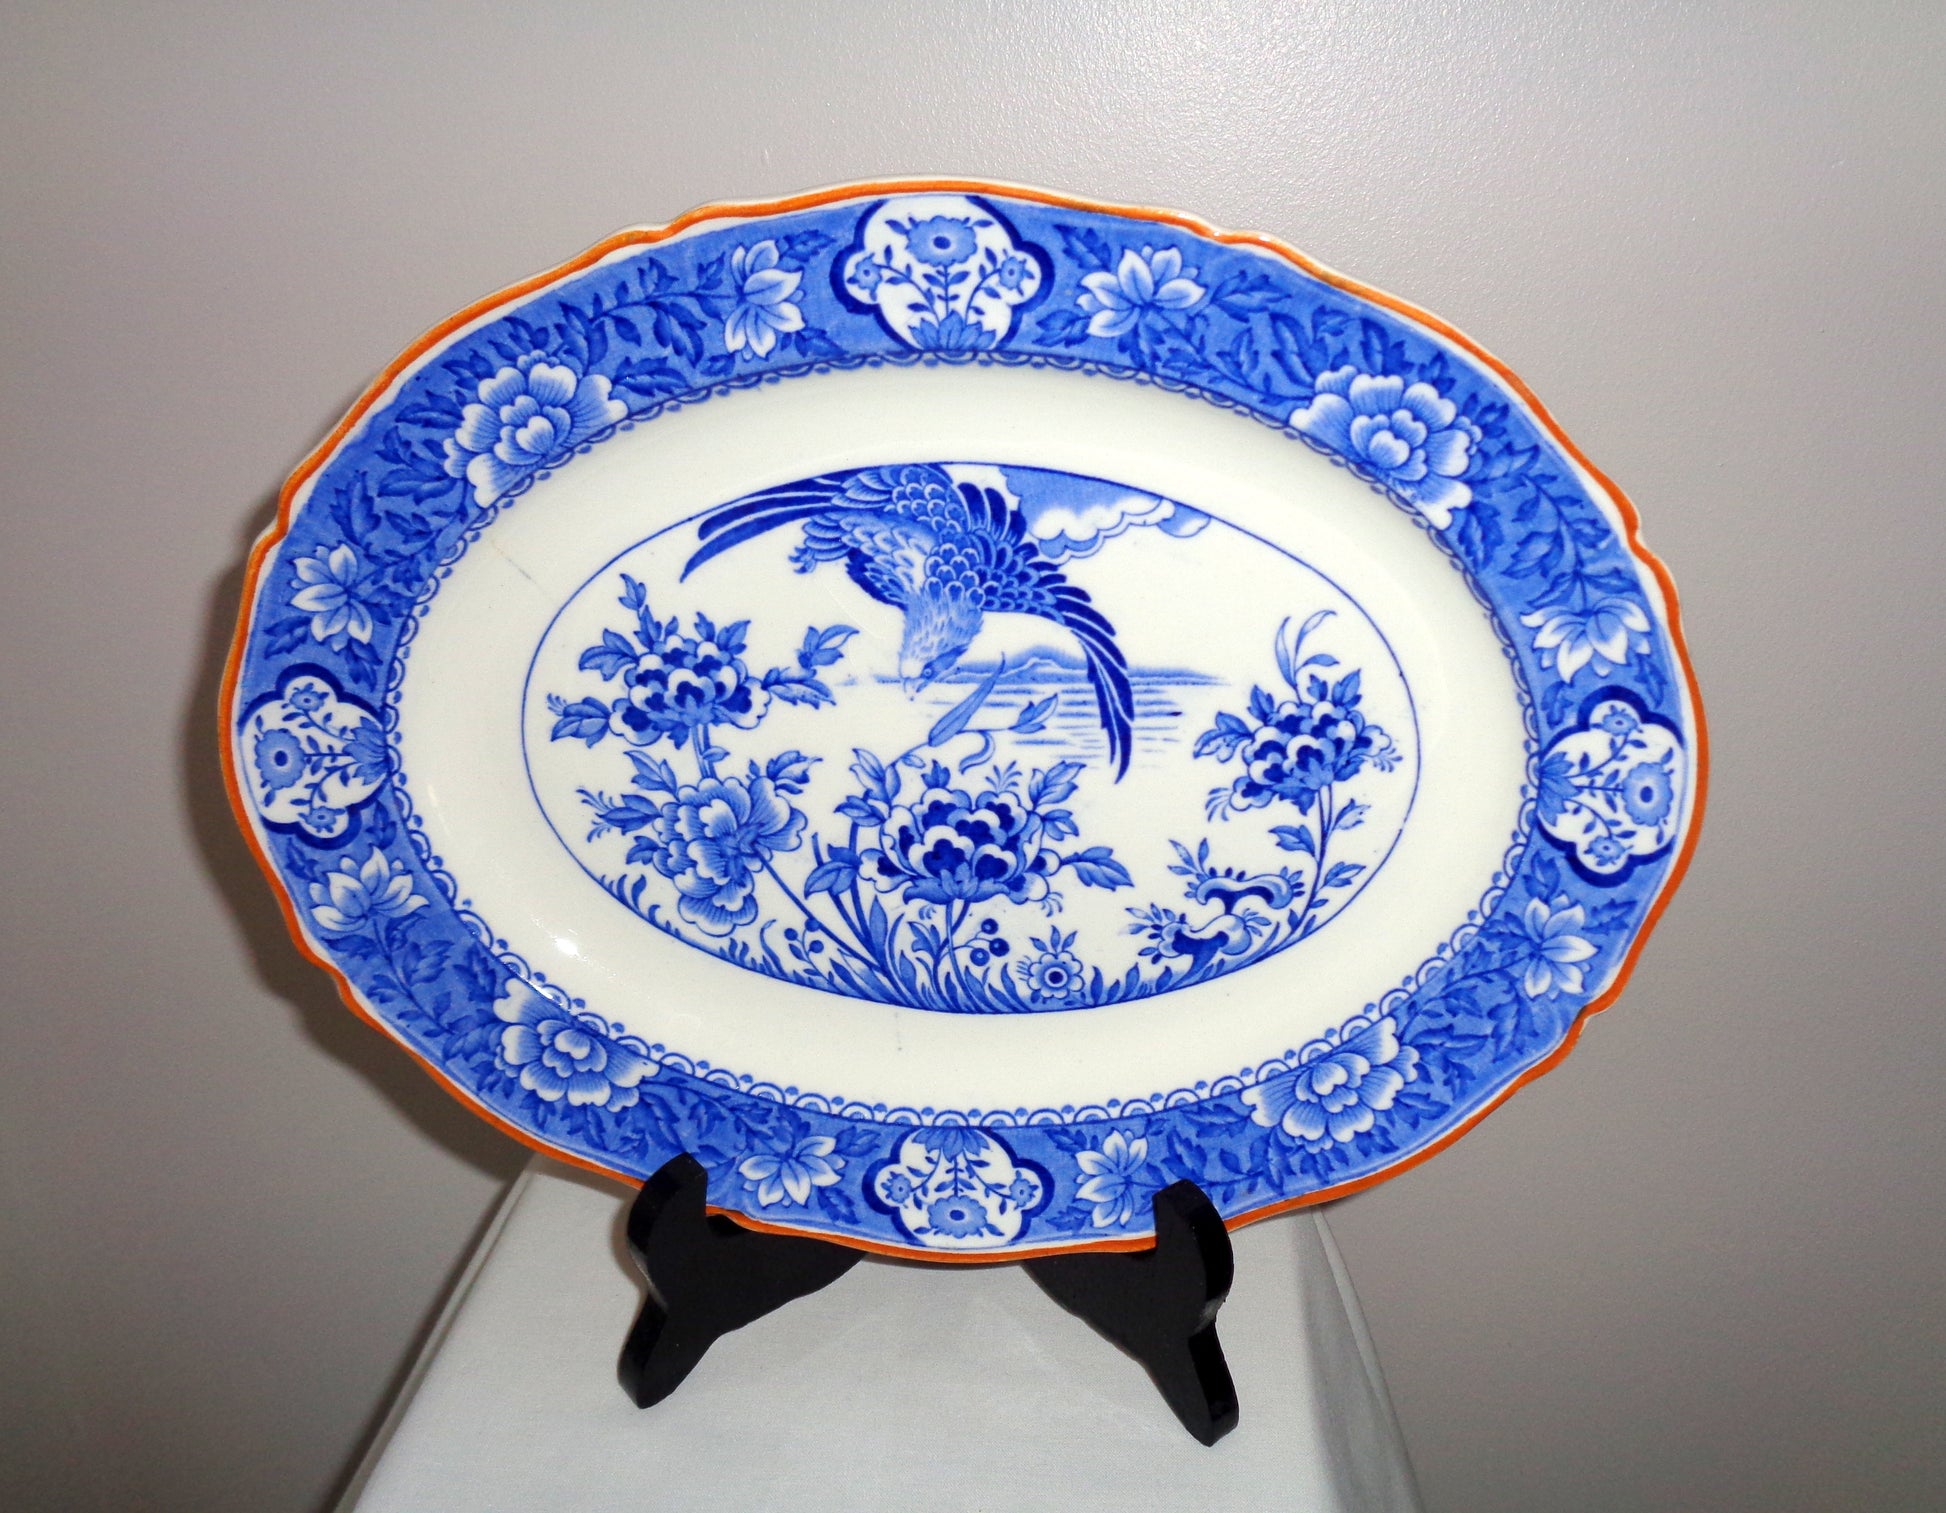 1930s Wood & Sons Aquila Blue and White H H & G Small Oval Platter